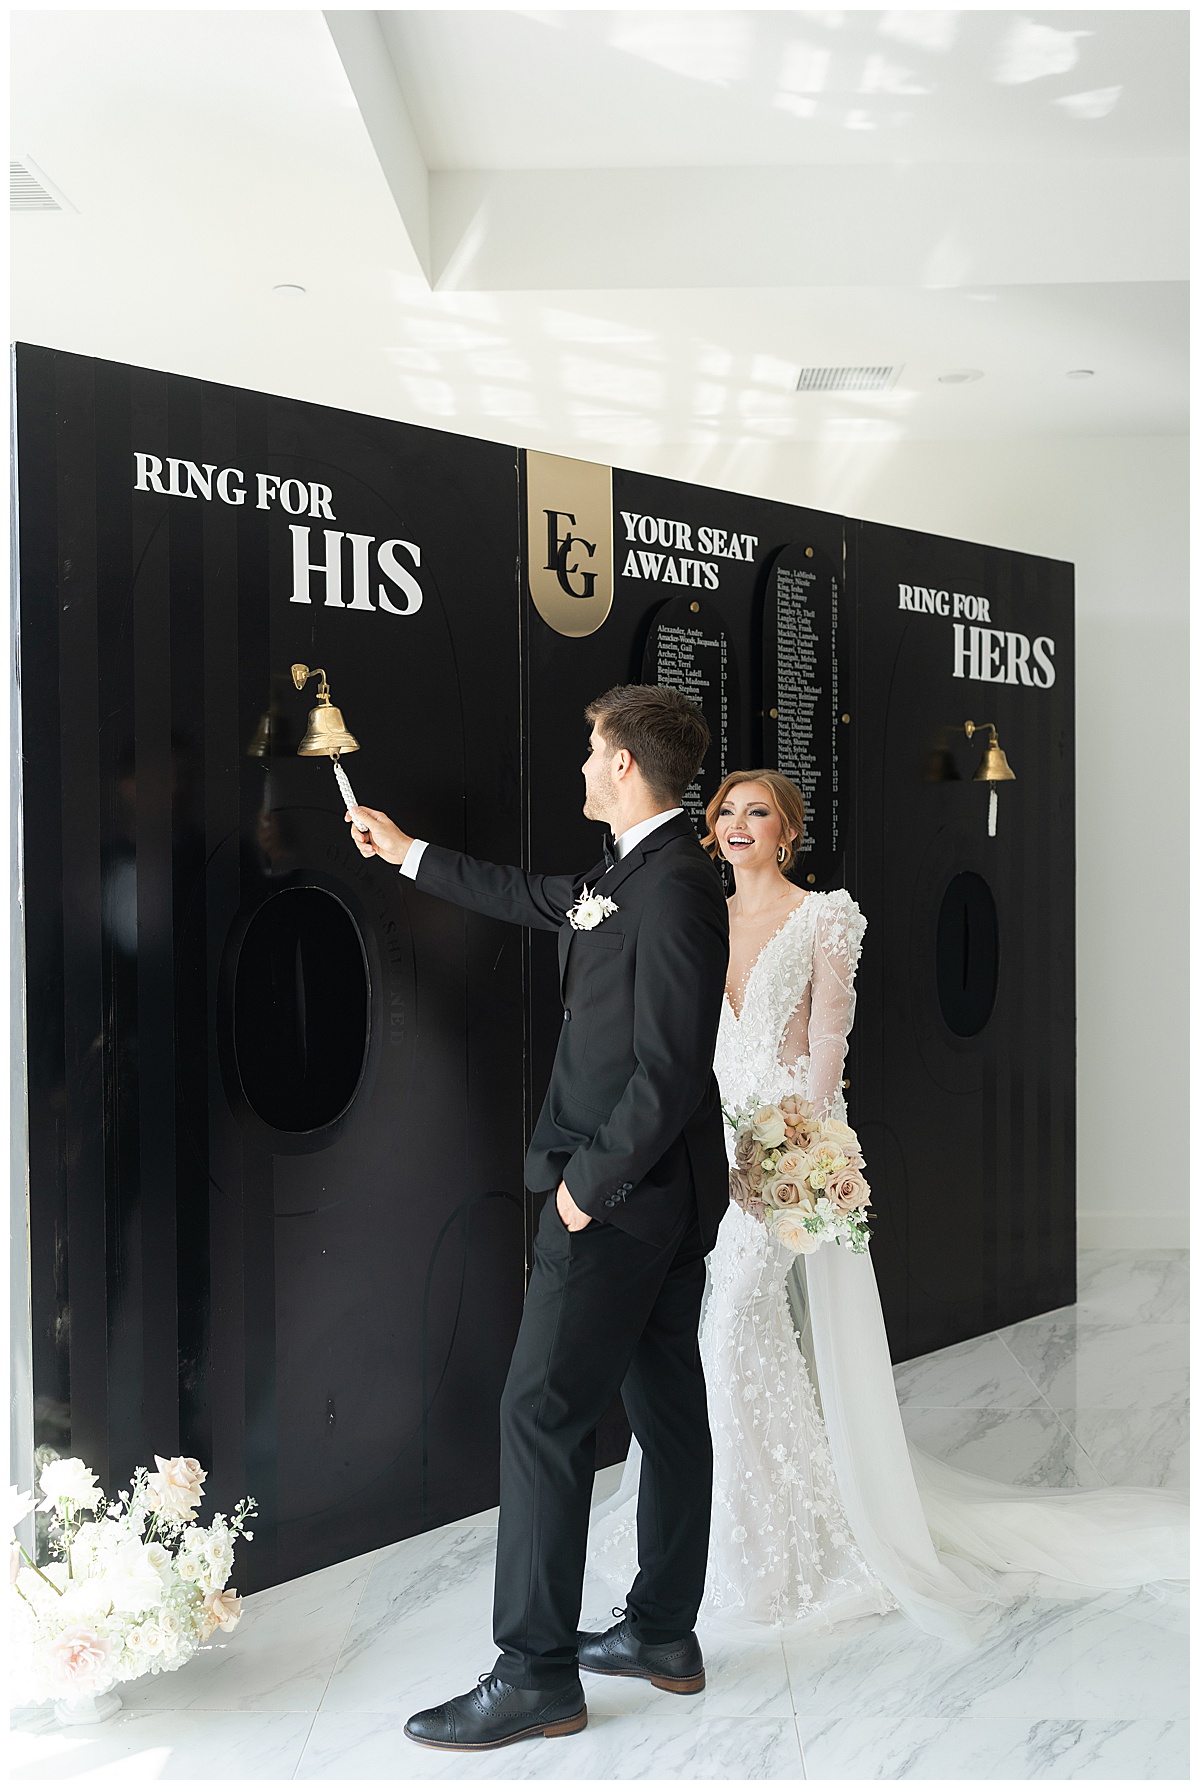 Couple ring bell as Wedding Traditions to Leave Behind